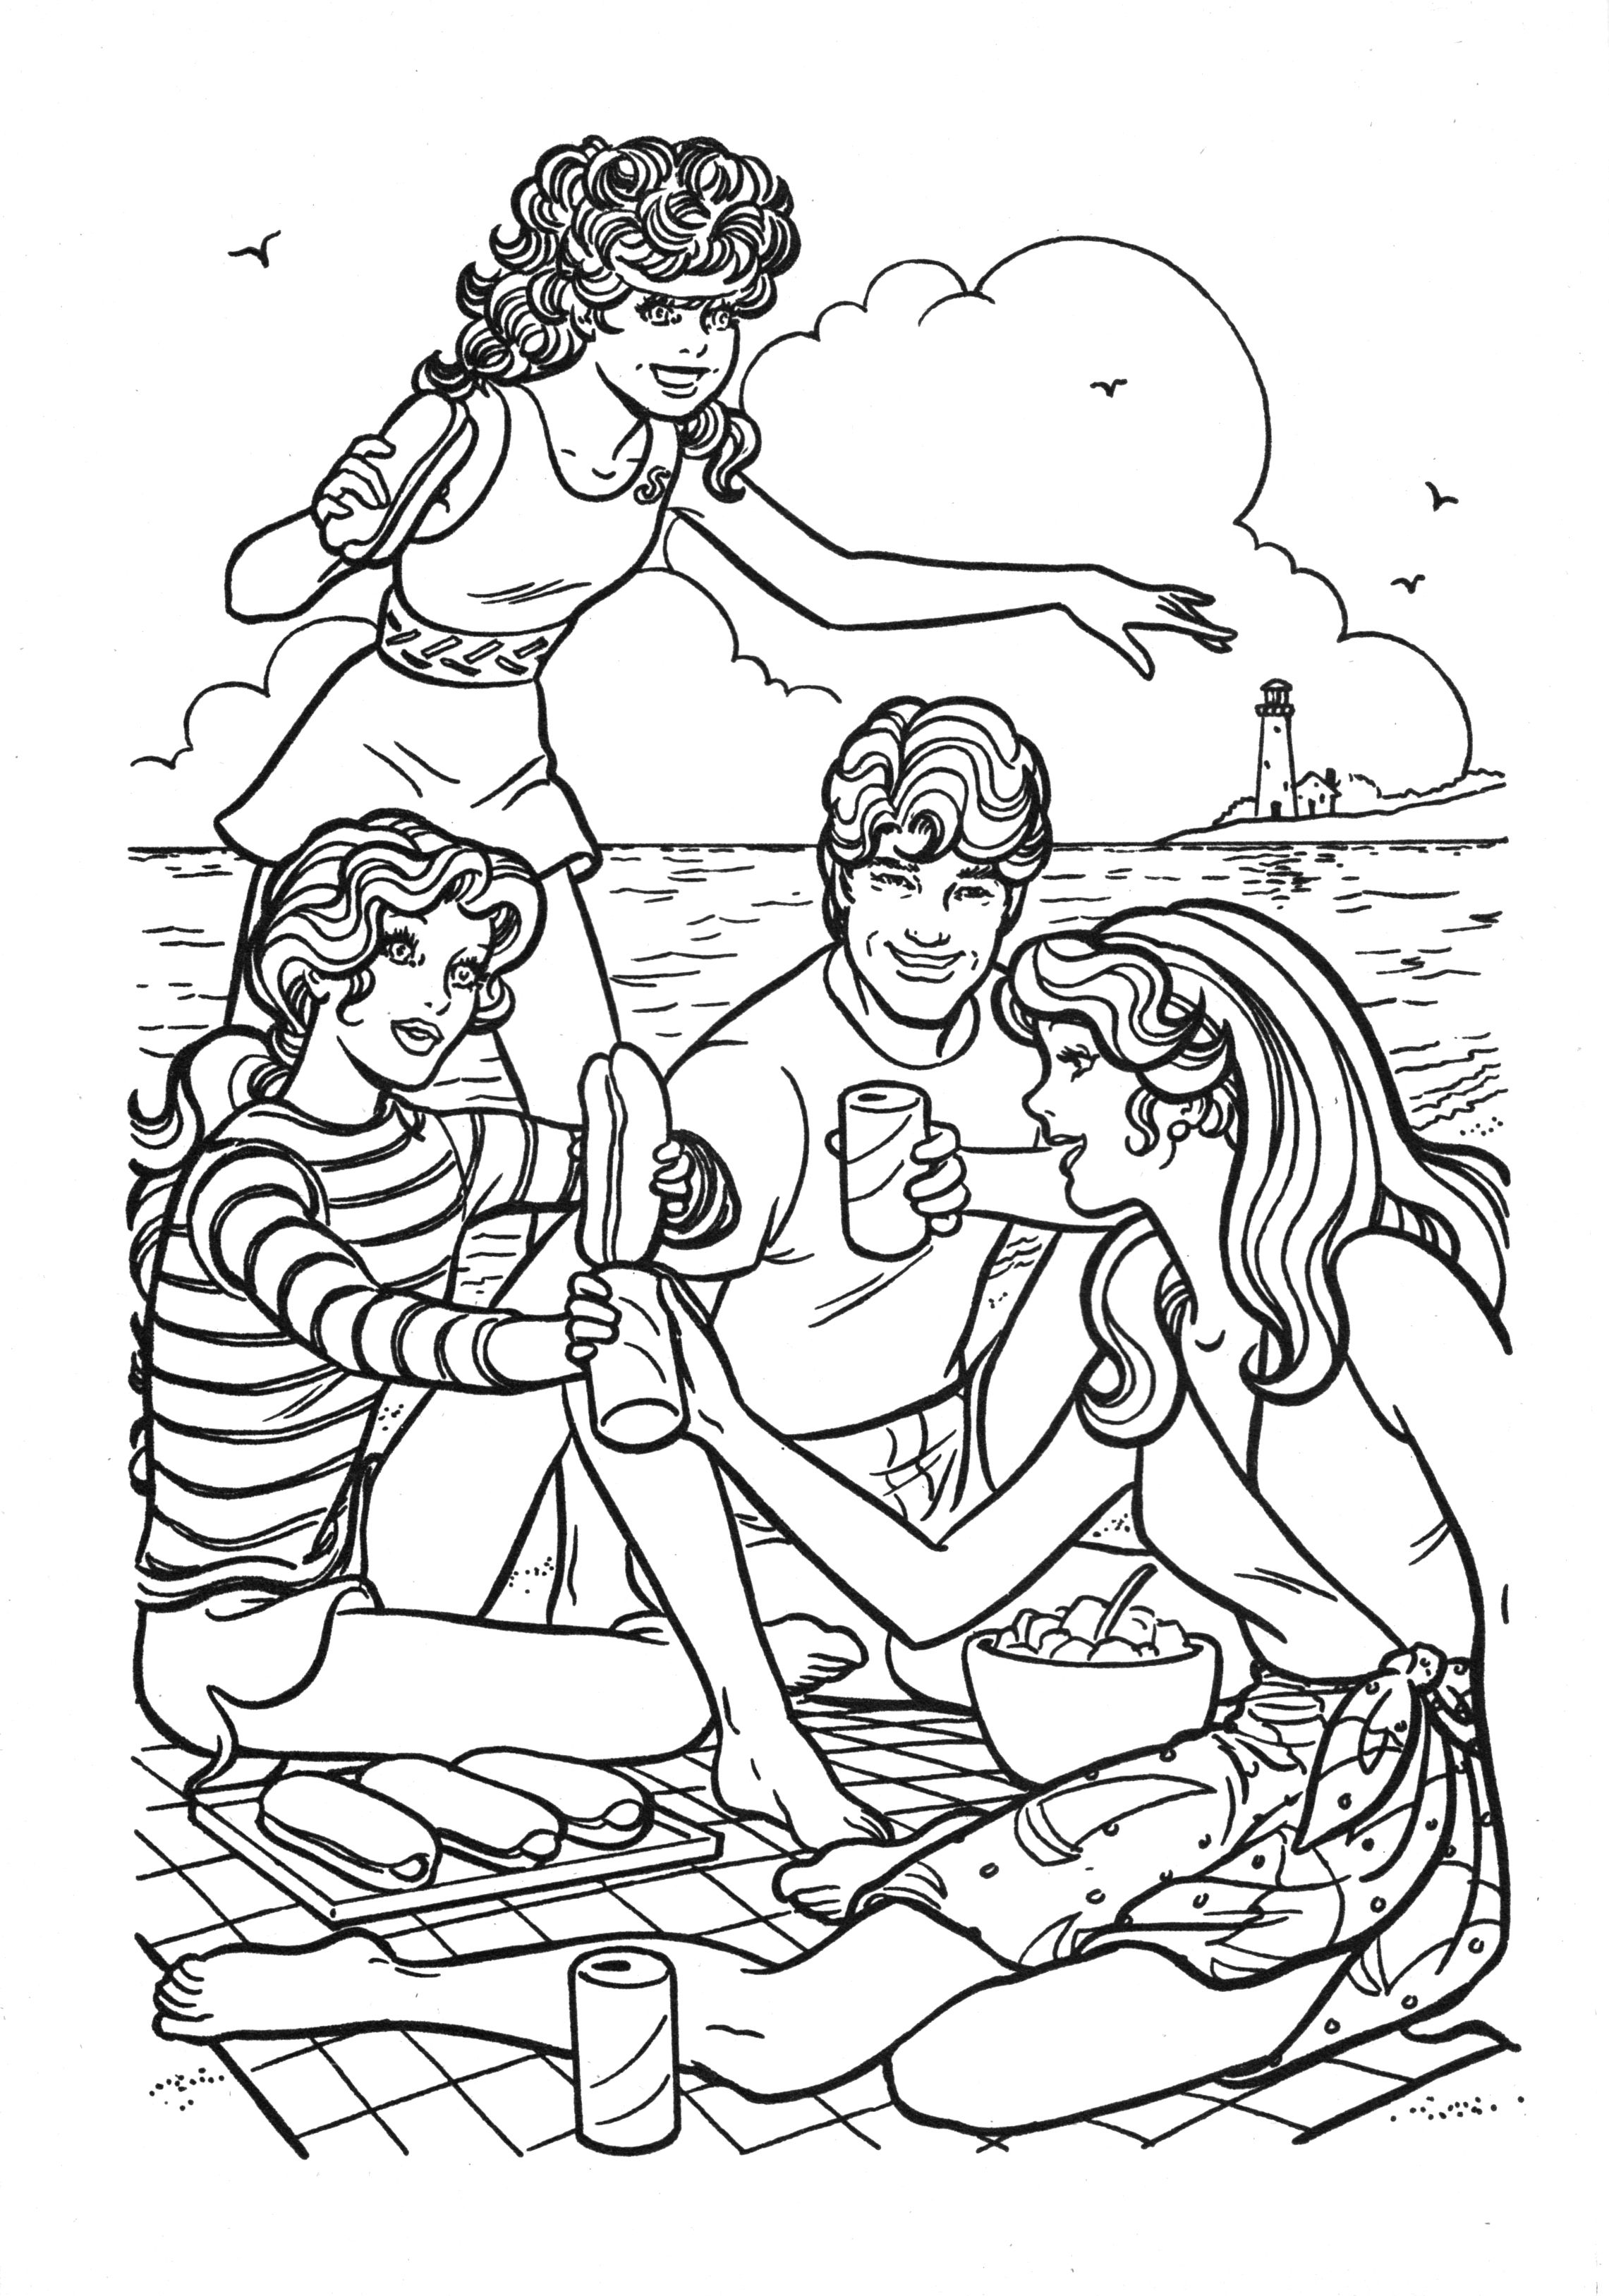 80s colouring book page | Barbie coloring, Vintage coloring books, Animal coloring  pages